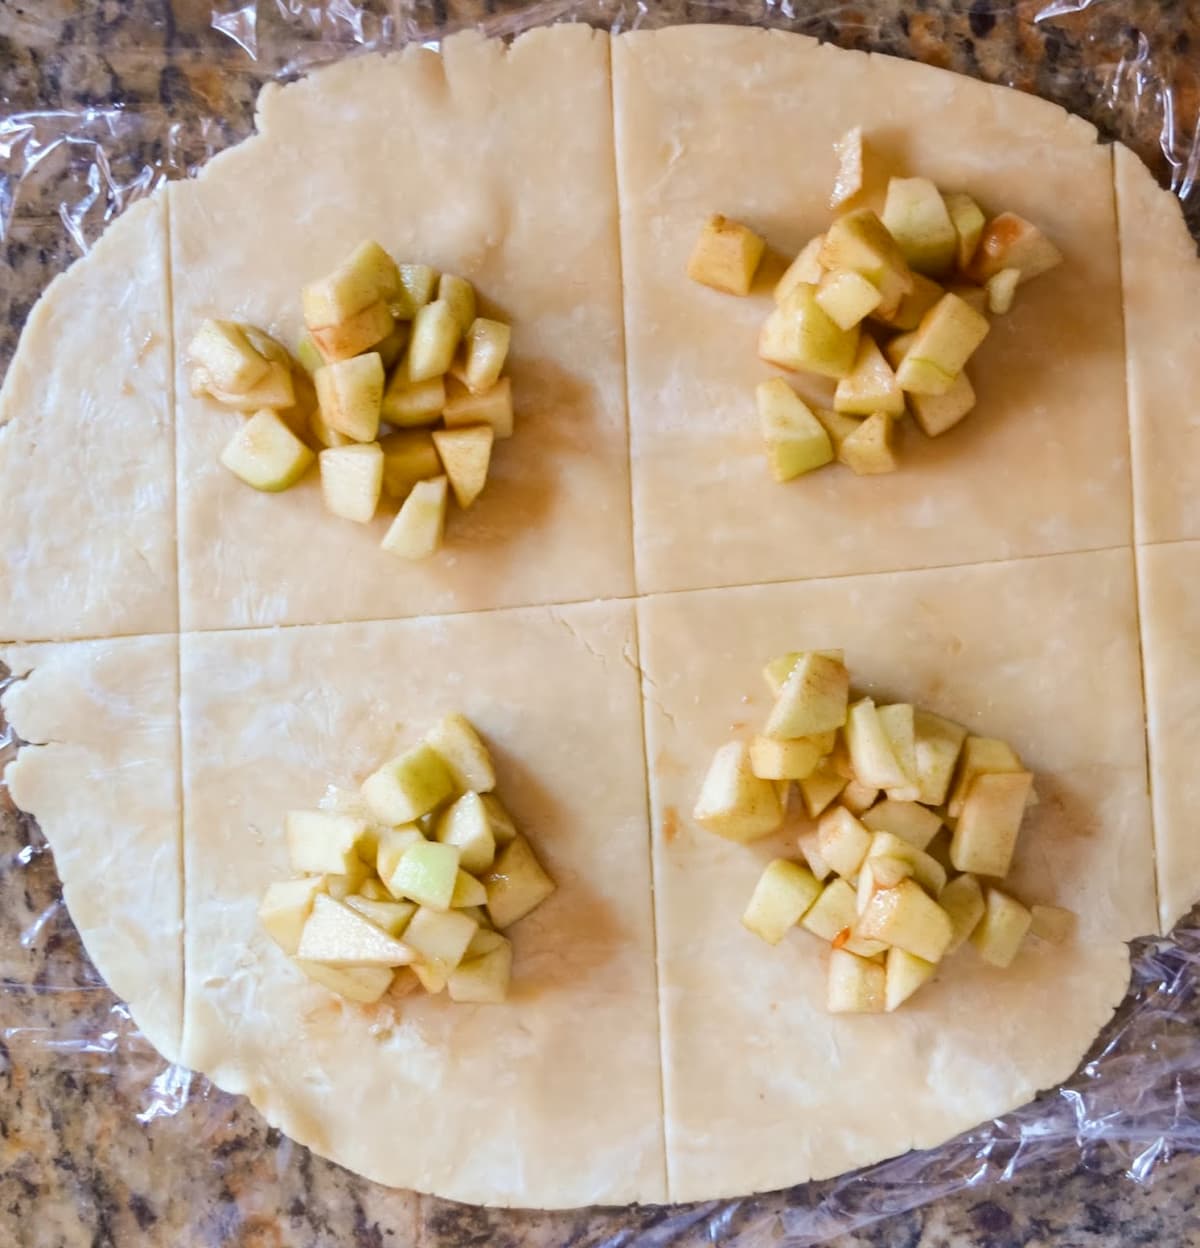 Apple mixture placed on rolled out pie squares.